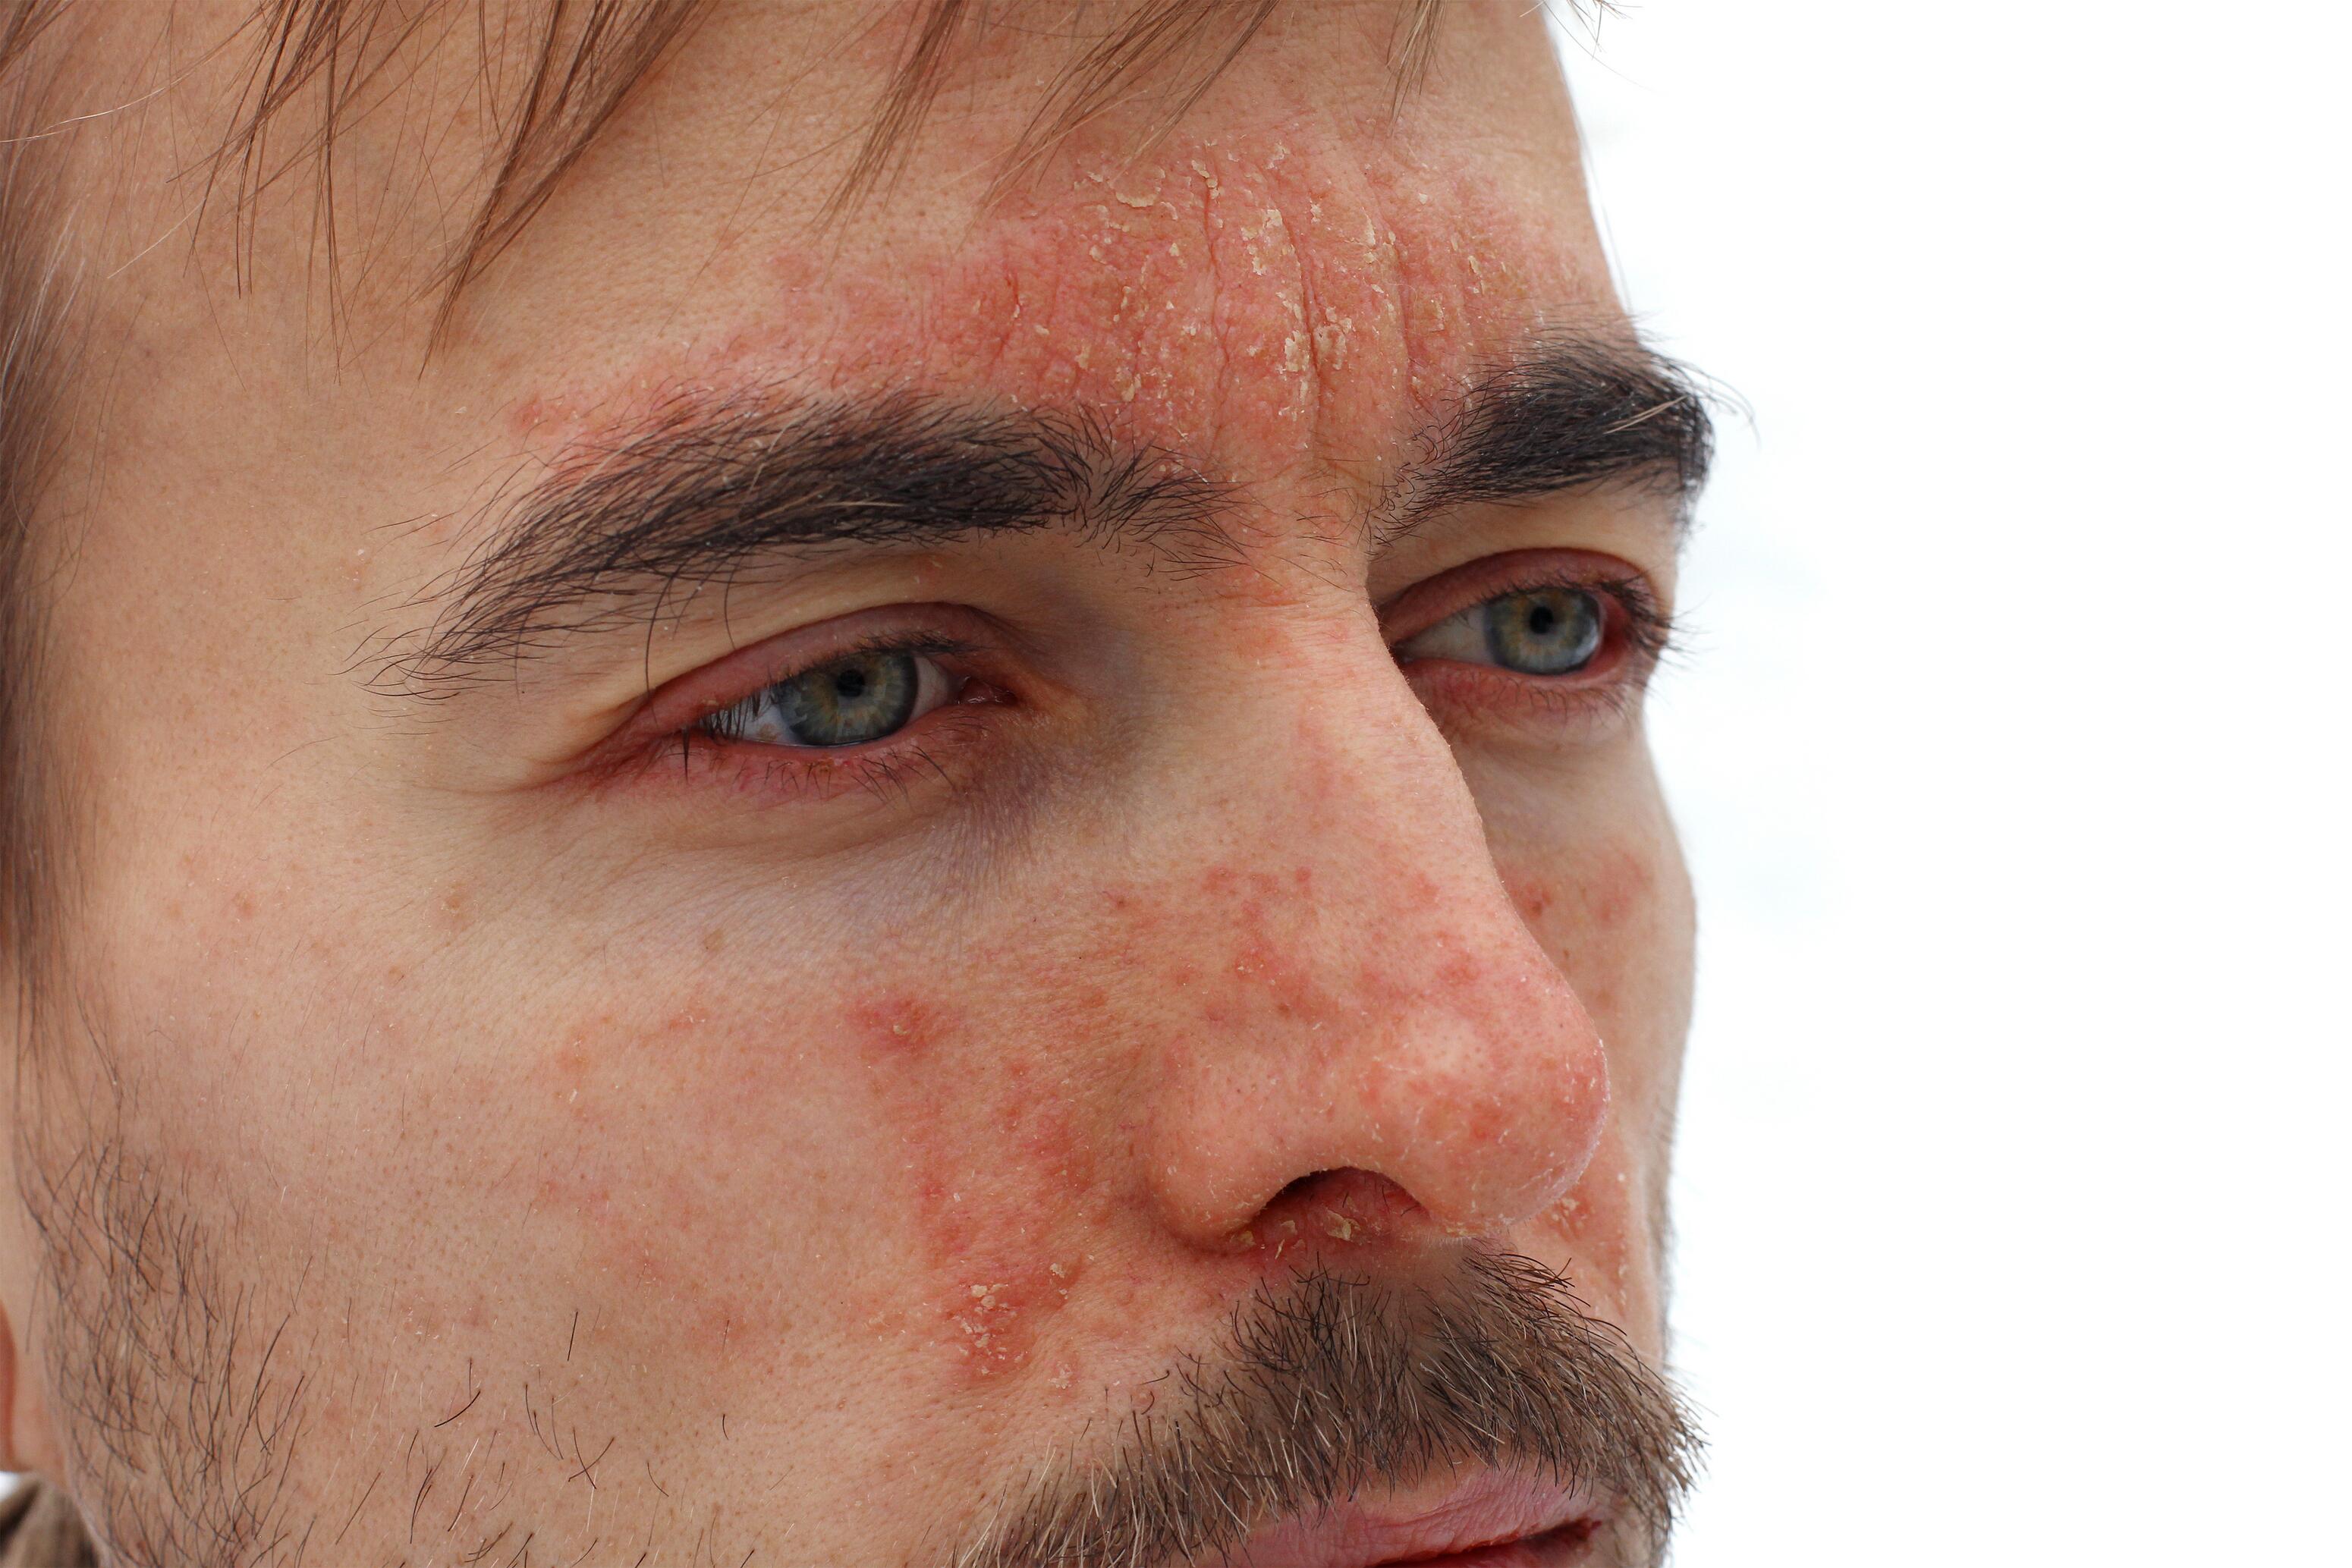 Man with psoriasis on the face